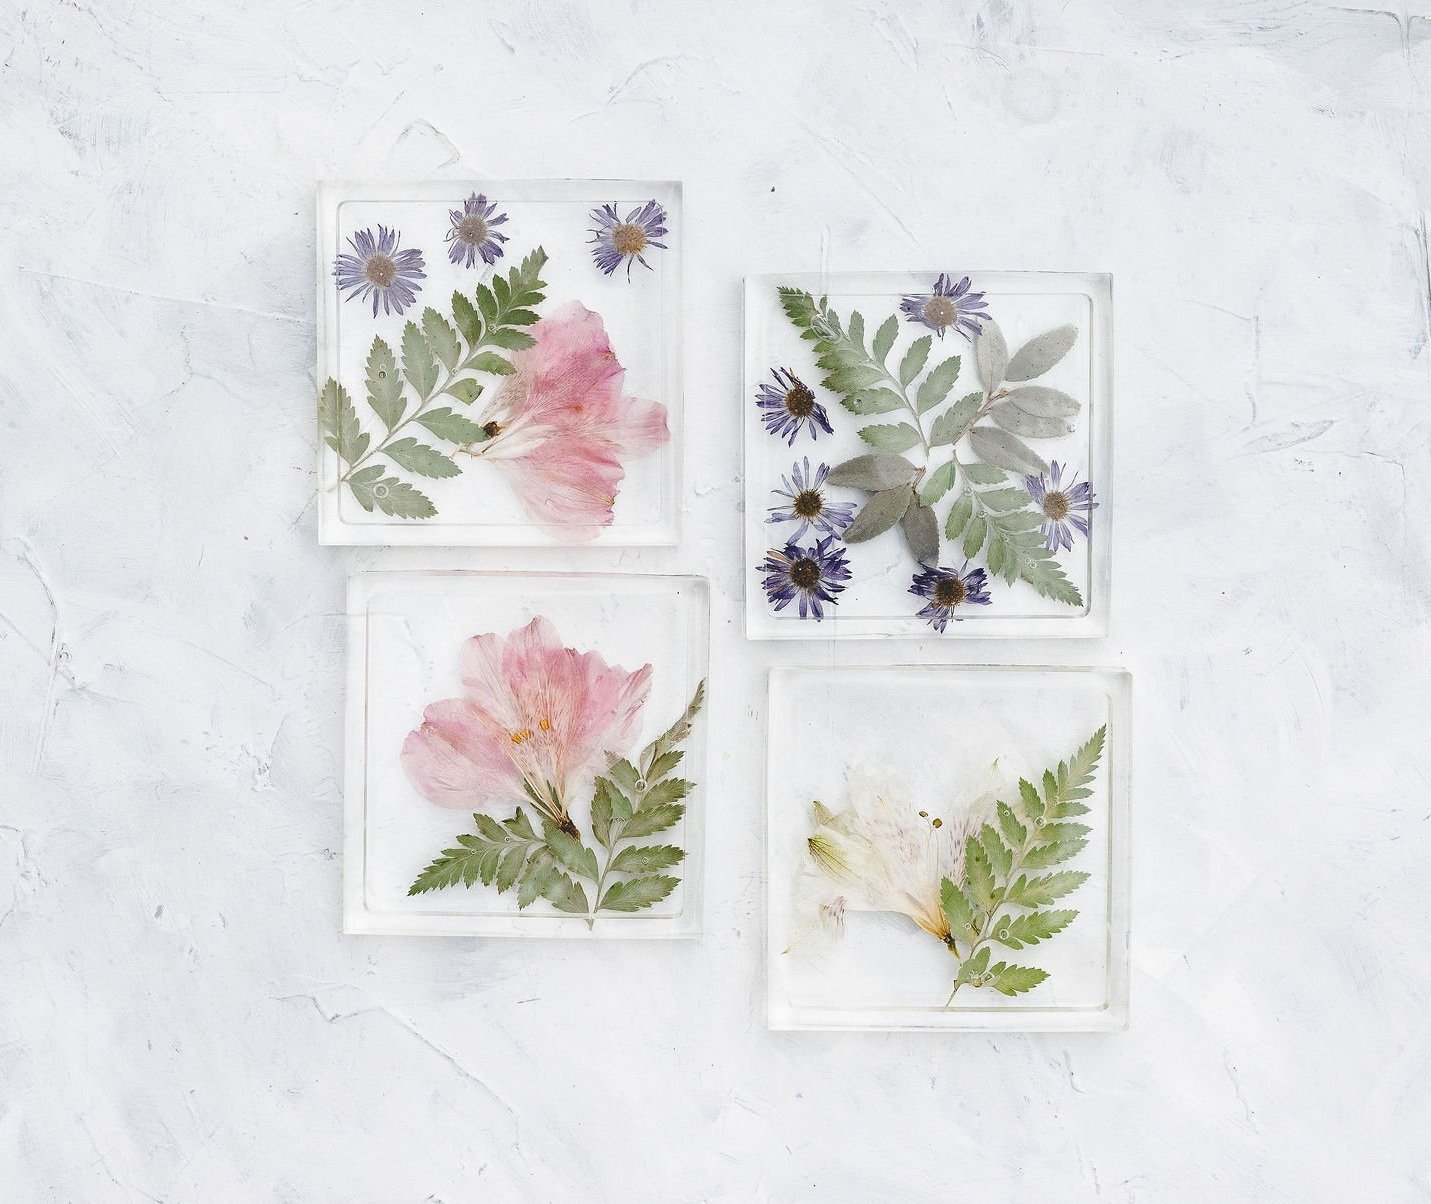 Pressed Flower Rectangle Wall Hanger - Preserved Flower Wall